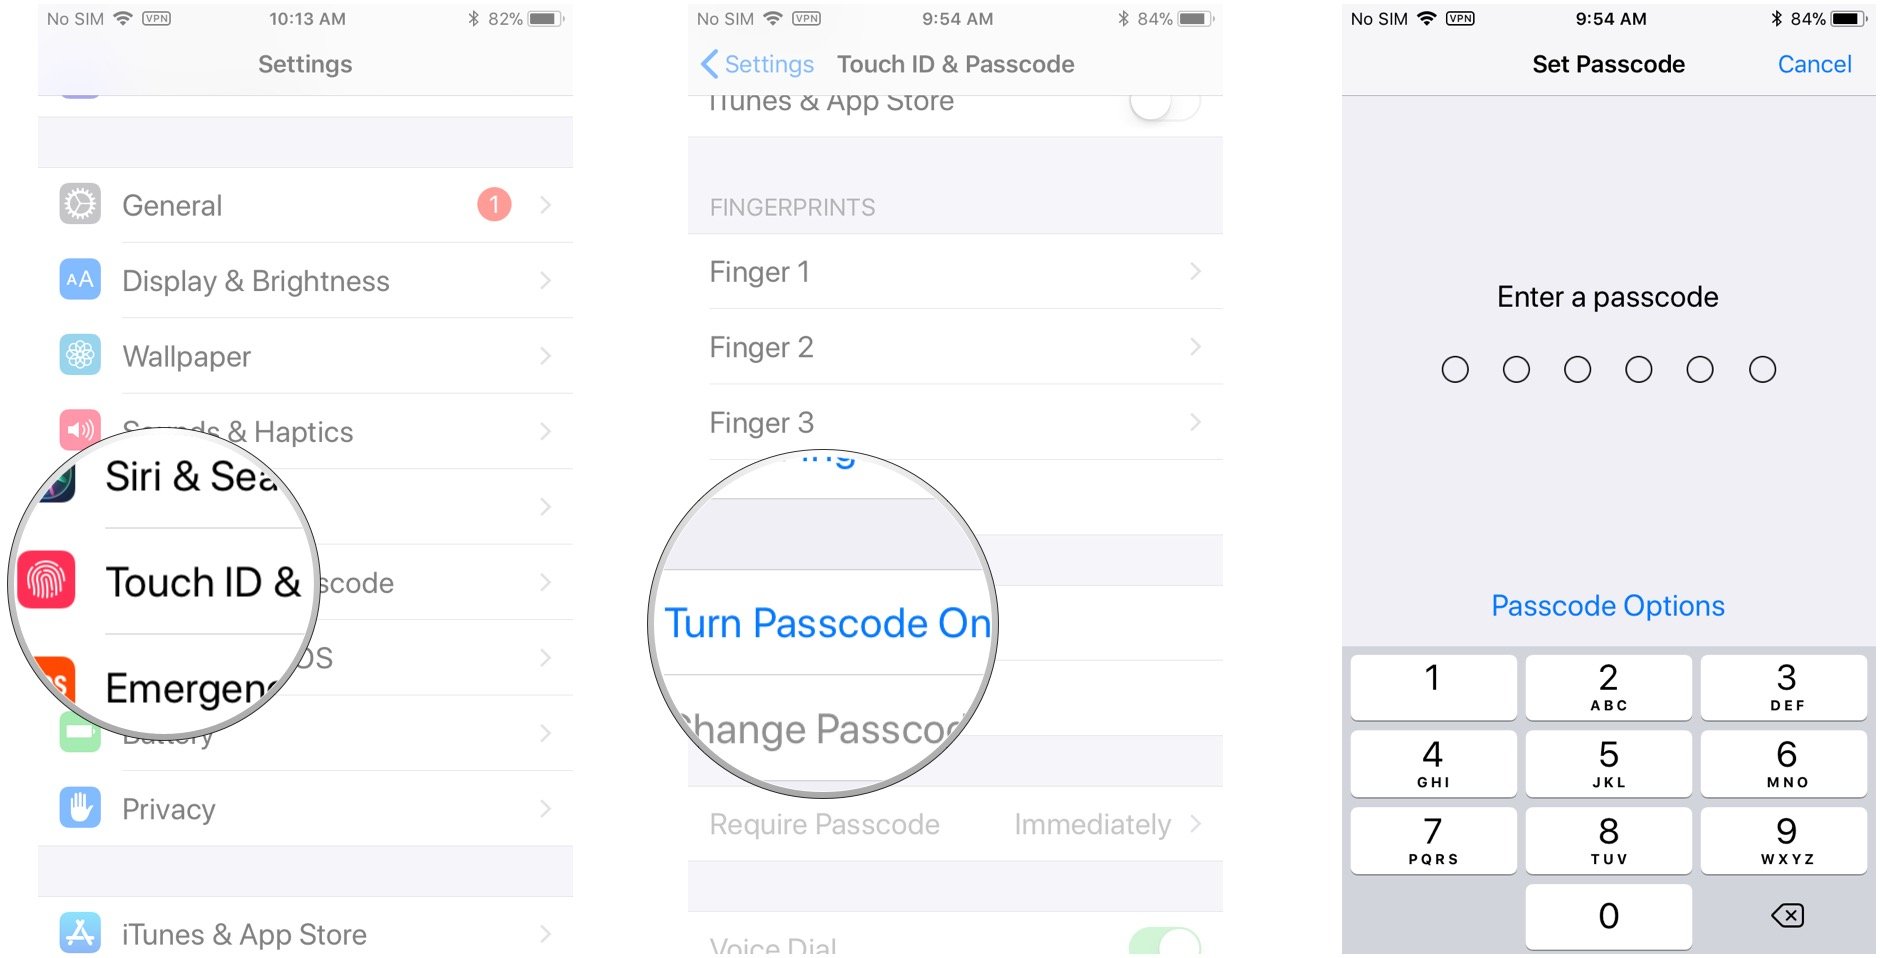 Tap Touch ID & Passcode, tap Turn Passcode On, enter a passcode, enter it again to verify